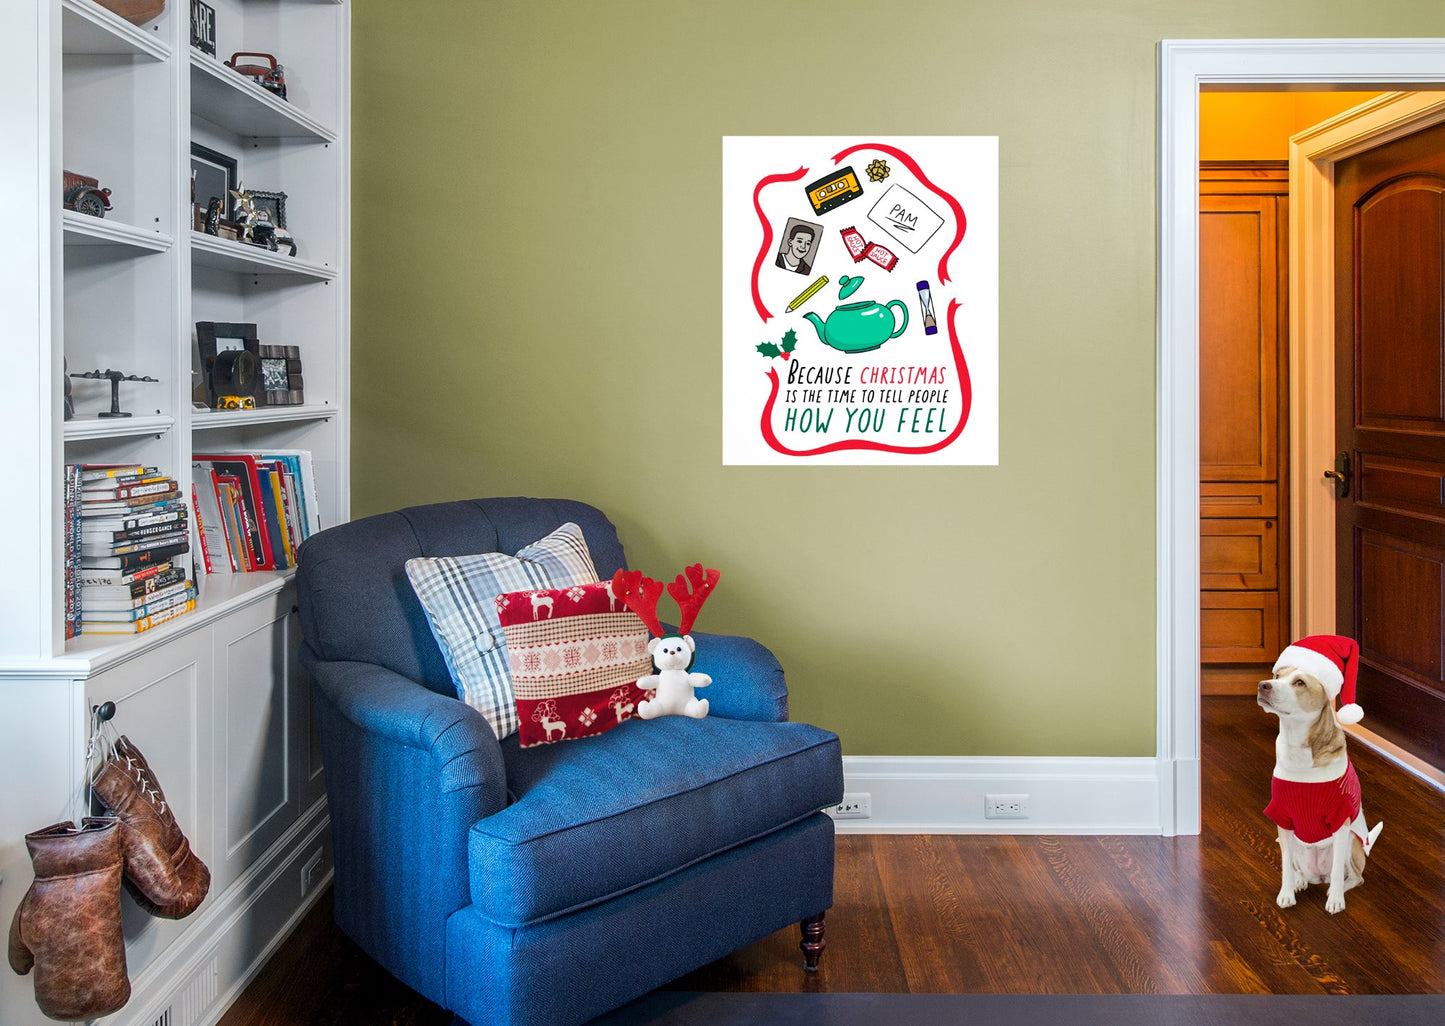 The Office: Teapot Mural - Officially Licensed NBC Universal Removable Adhesive Decal